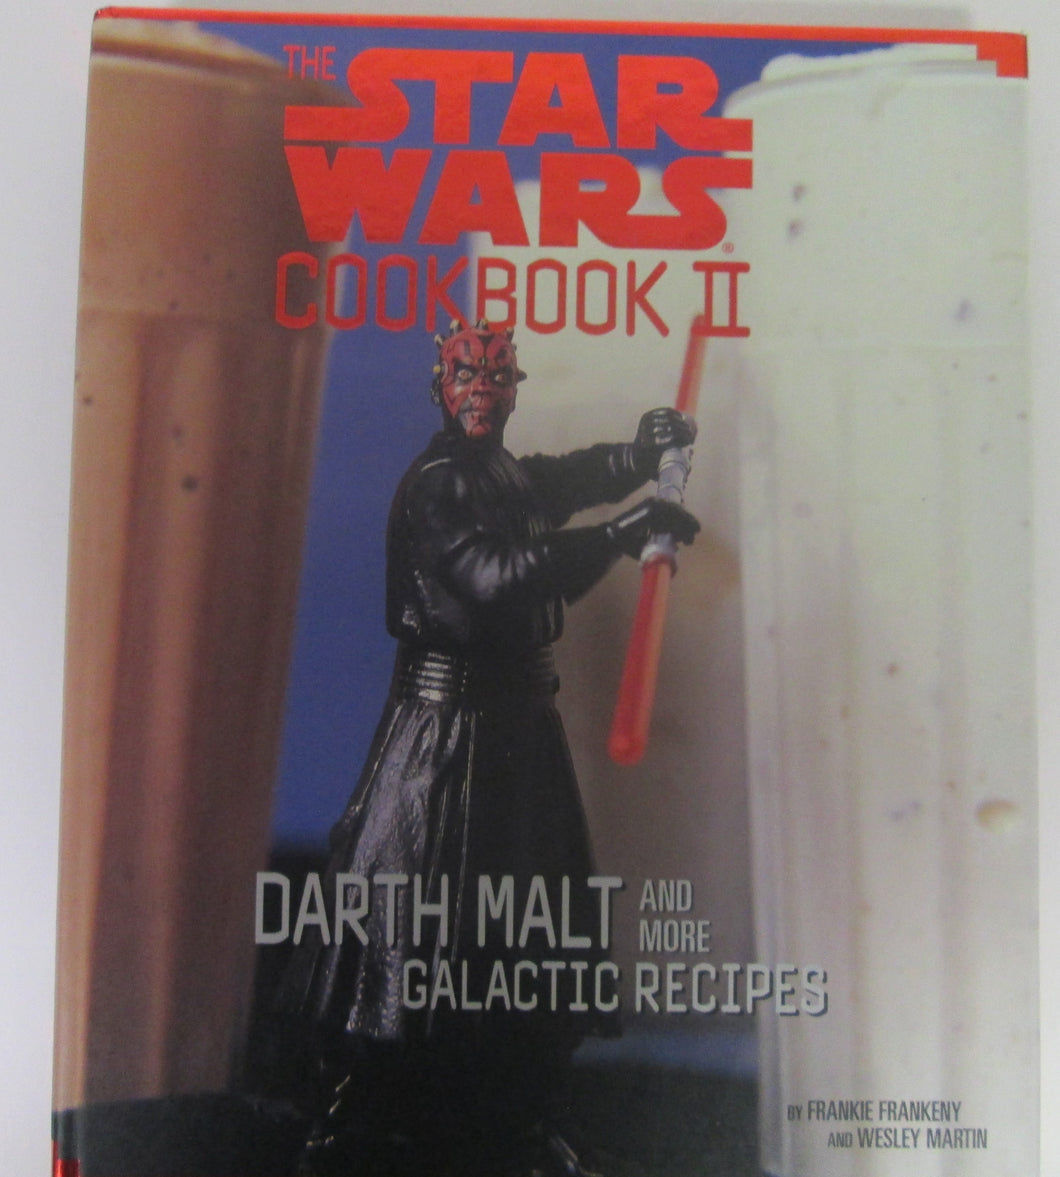 The Star Wars Cookbook II Darth Malt and More Galactic Recipes by Frankeny & Martin HC 2000